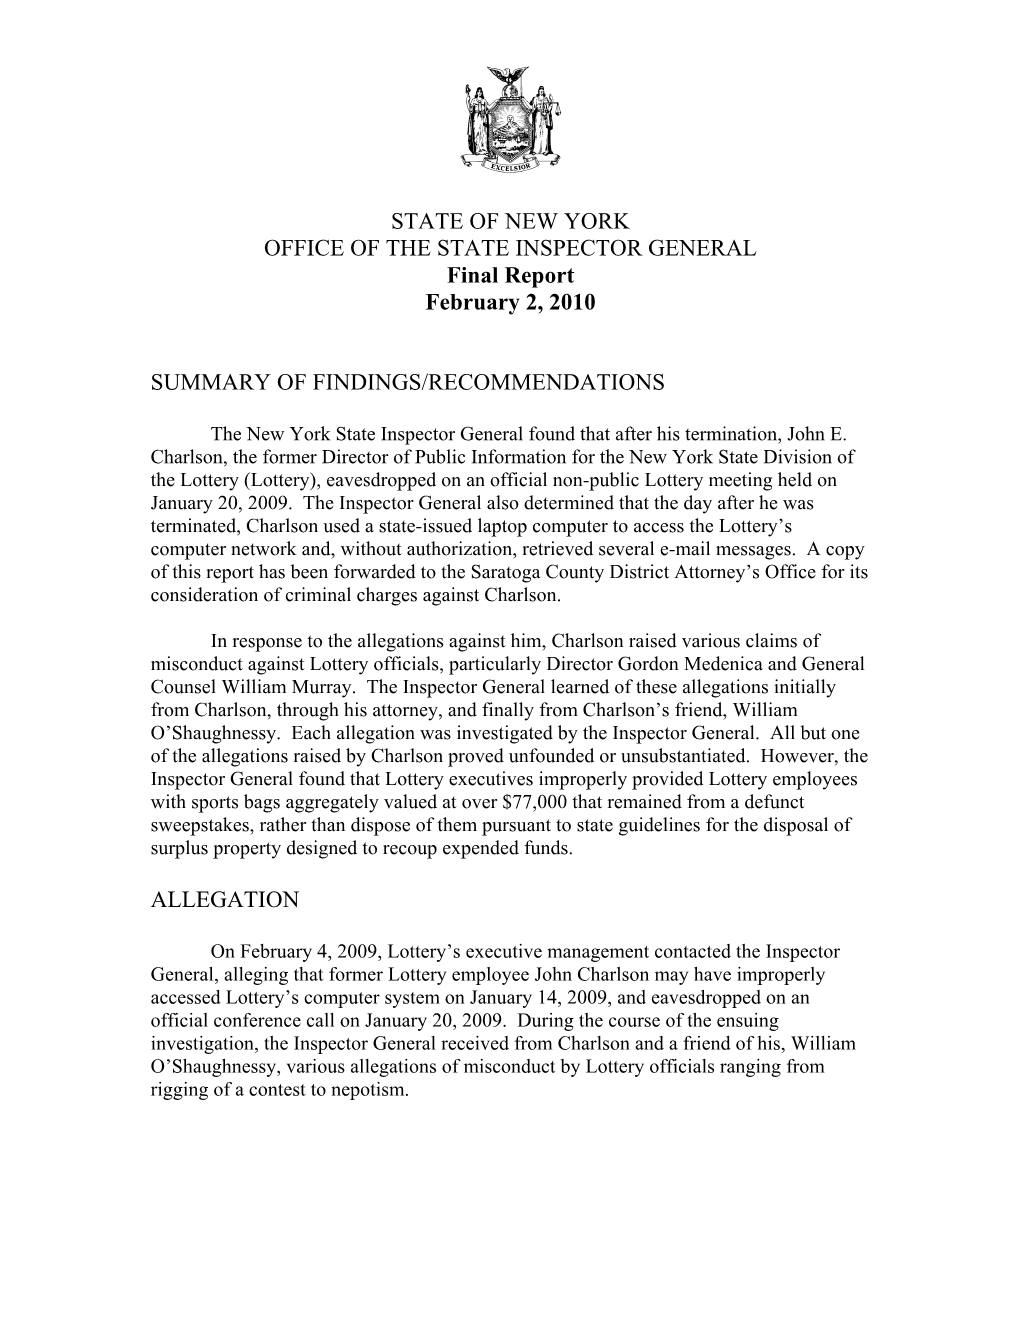 STATE of NEW YORK OFFICE of the STATE INSPECTOR GENERAL Final Report February 2, 2010